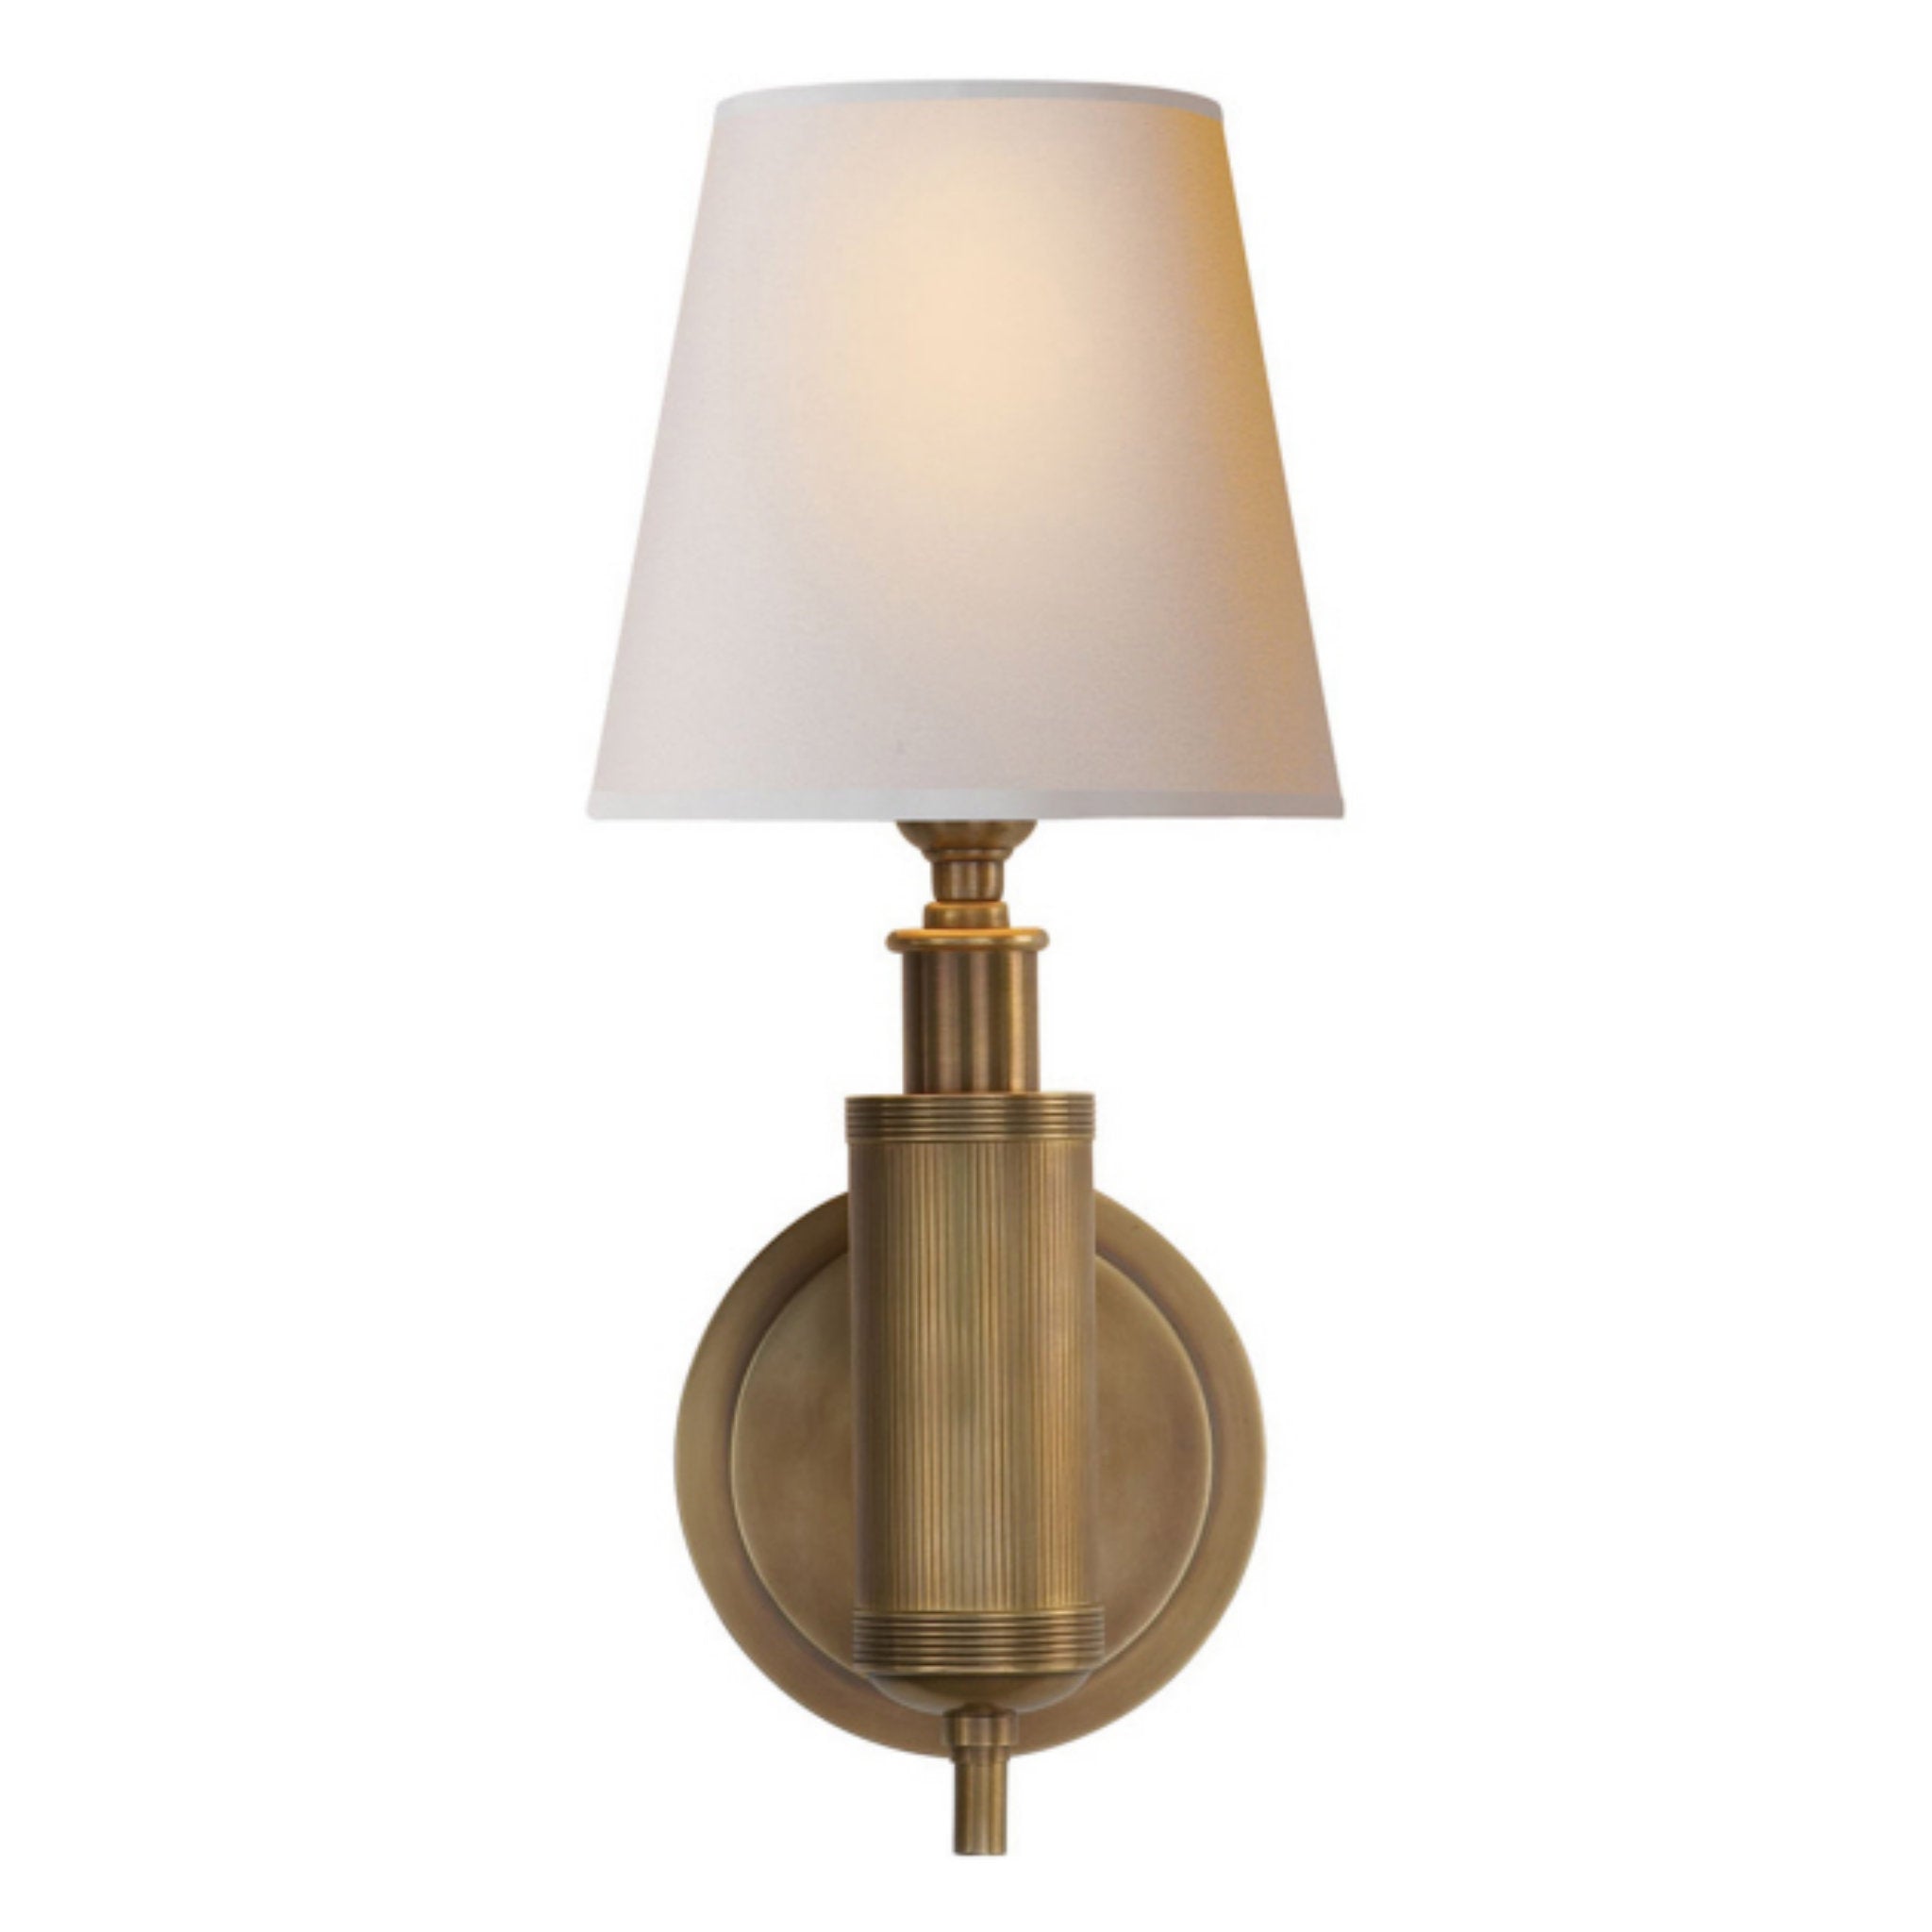 Thomas O'Brien Longacre Sconce in Hand-Rubbed Antique Brass with Natural Paper Shade